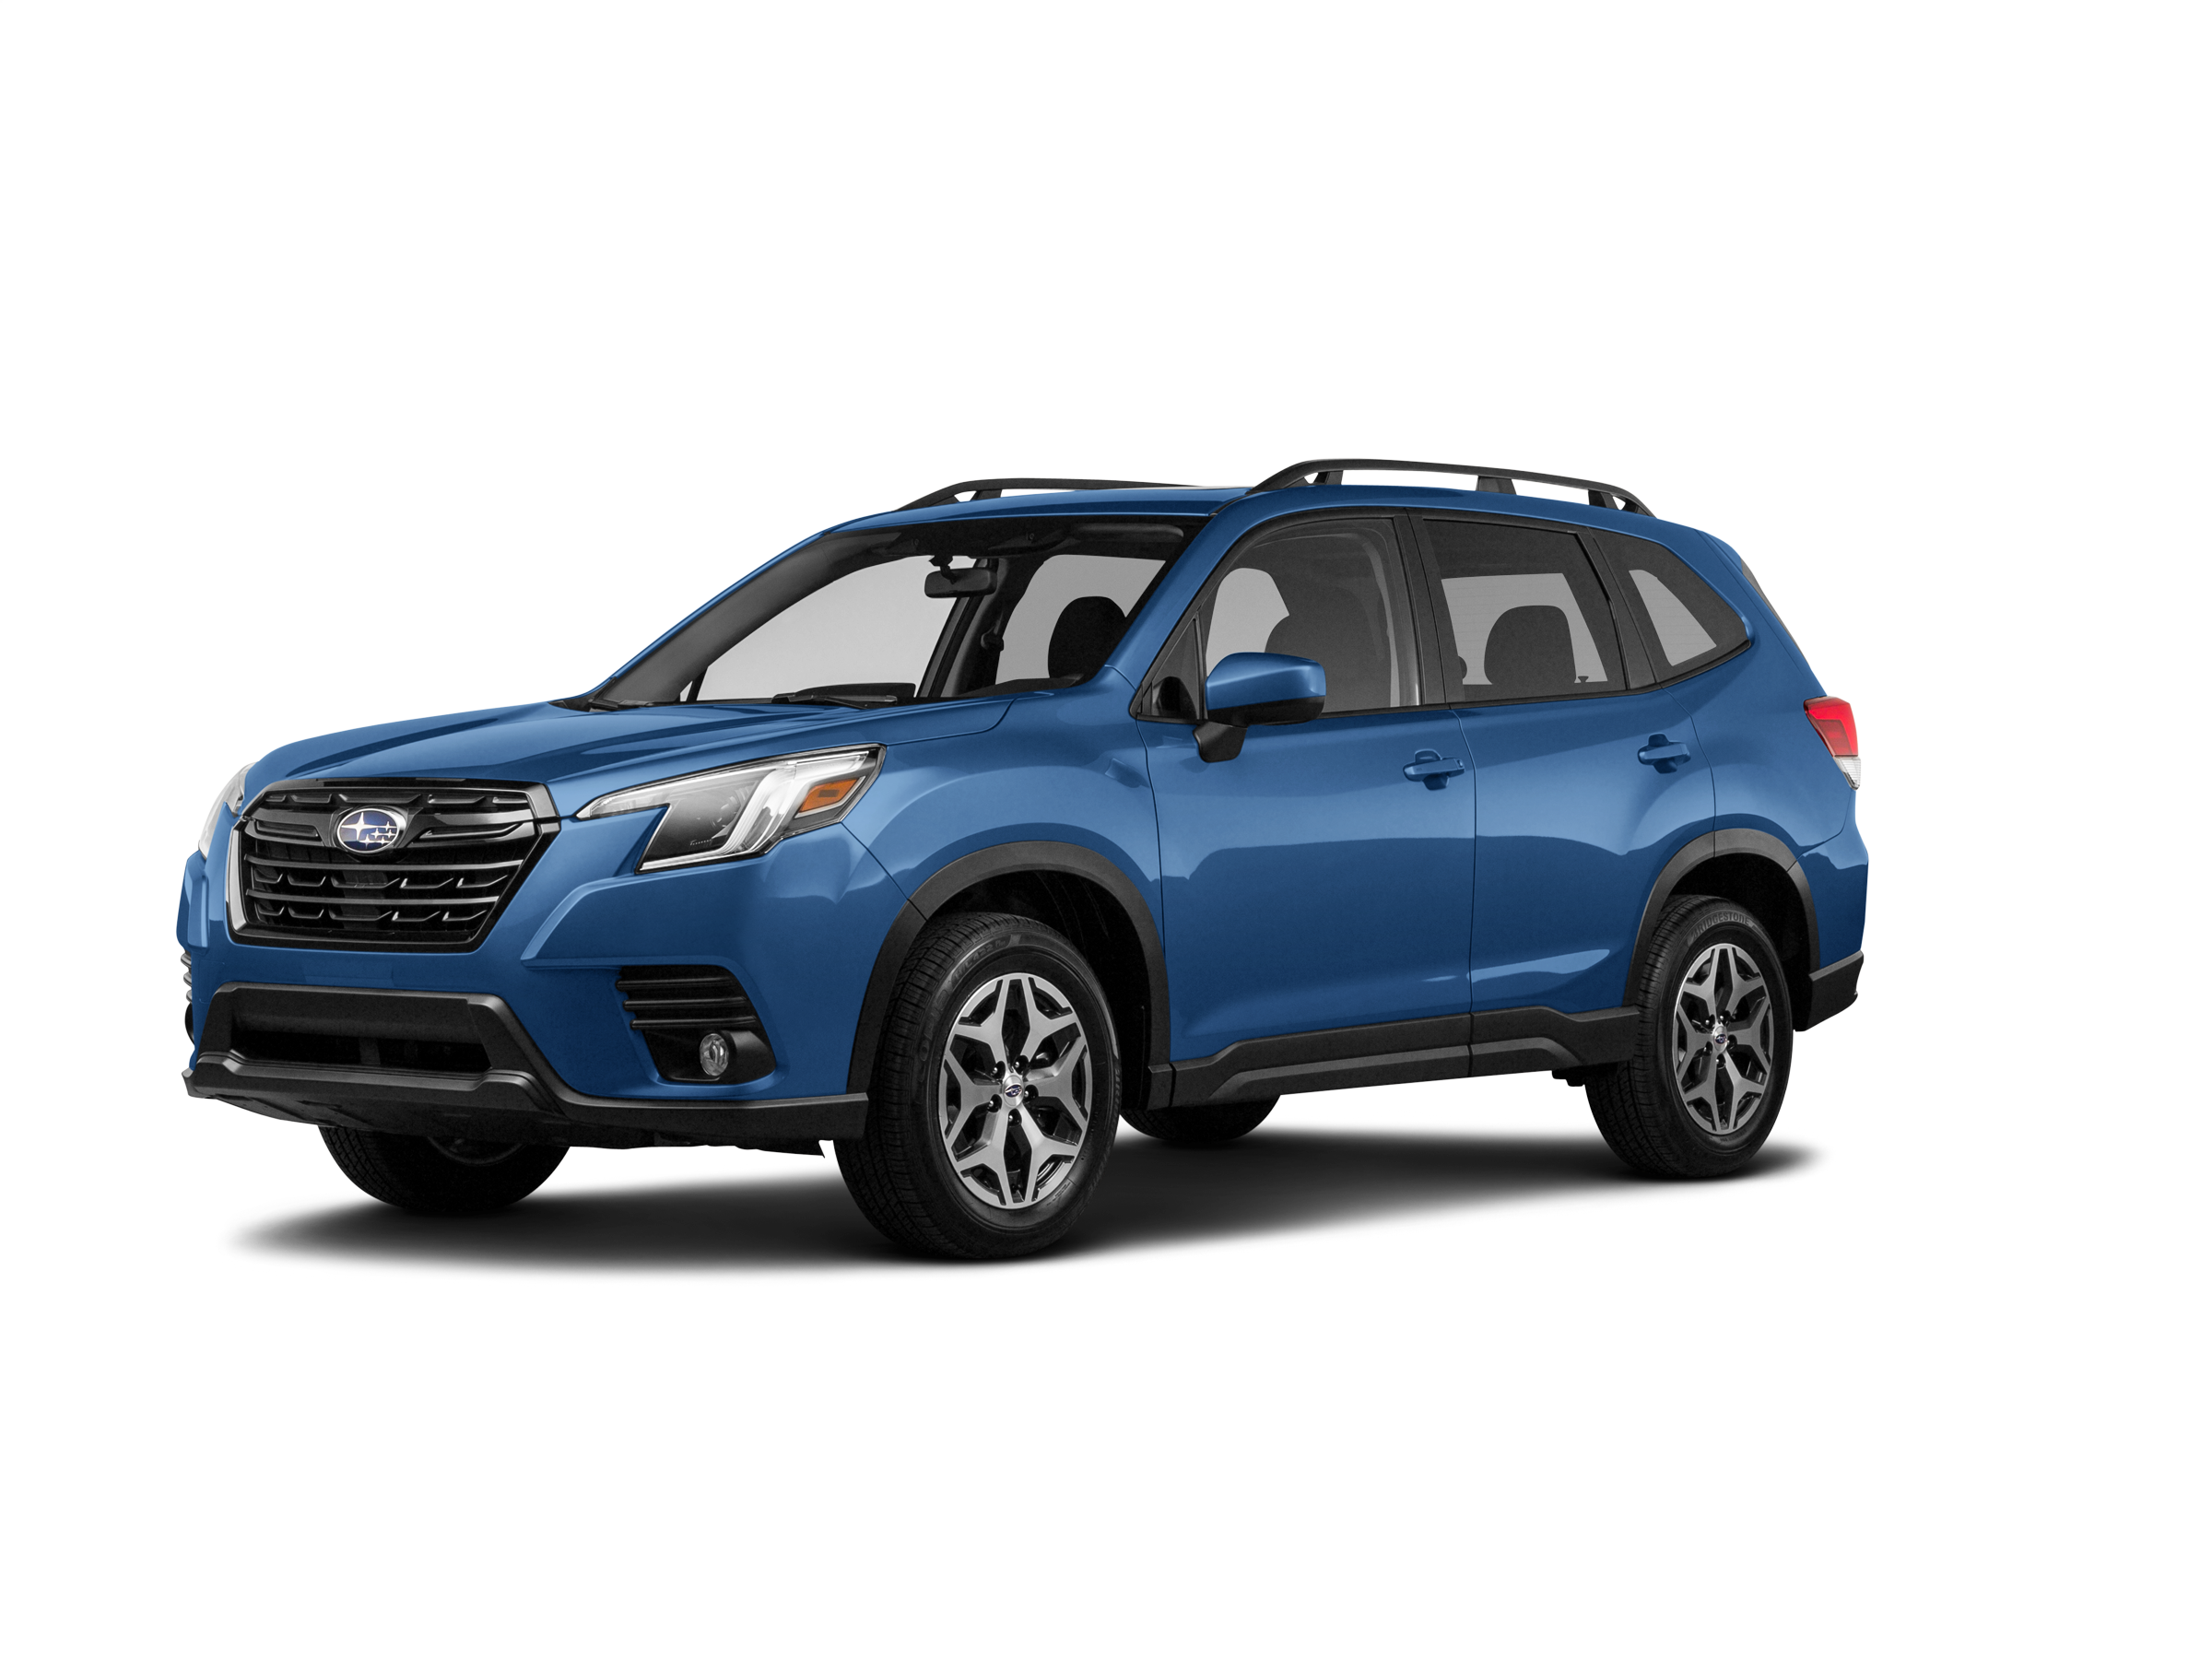 Kelley Blue Book Subaru Forester Share 84 Images And 11 Videos